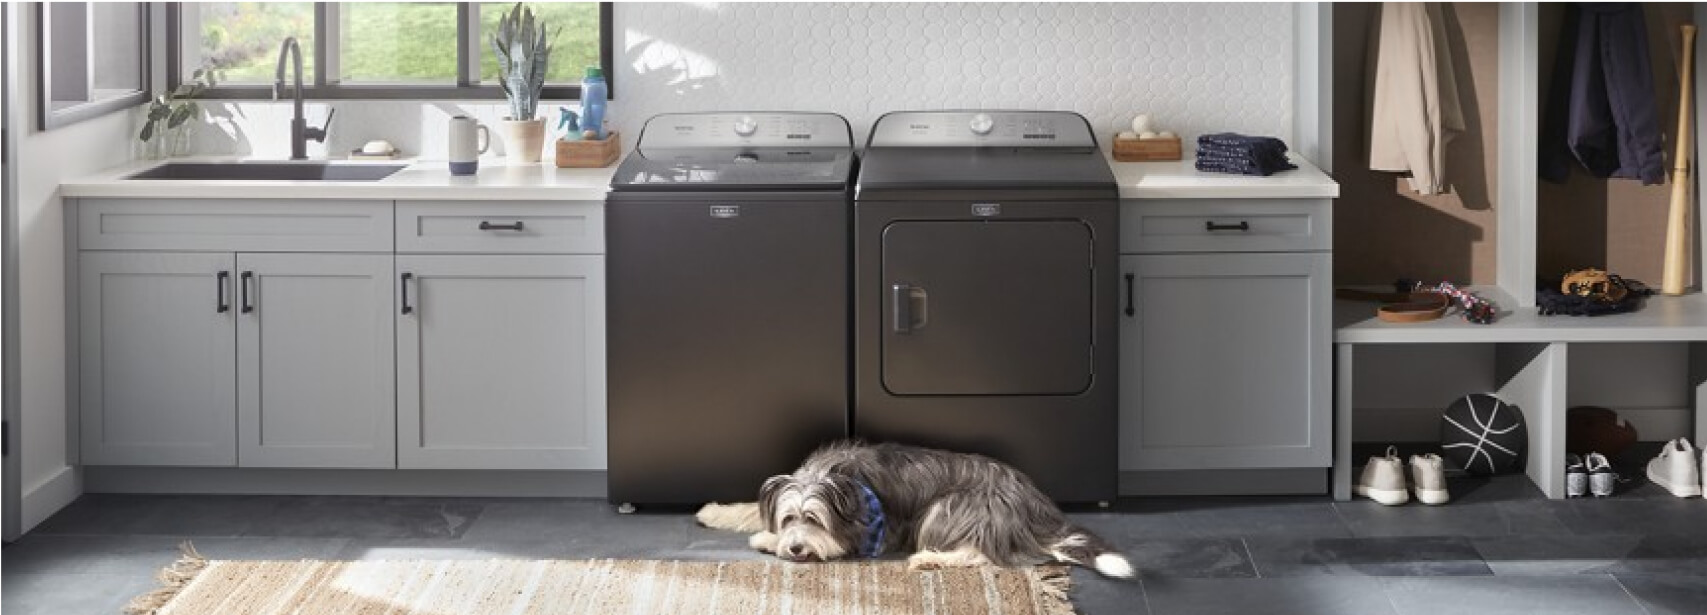 A Maytag® washer and dryer in a laundry room with white cabinets and dog laying on the floor 